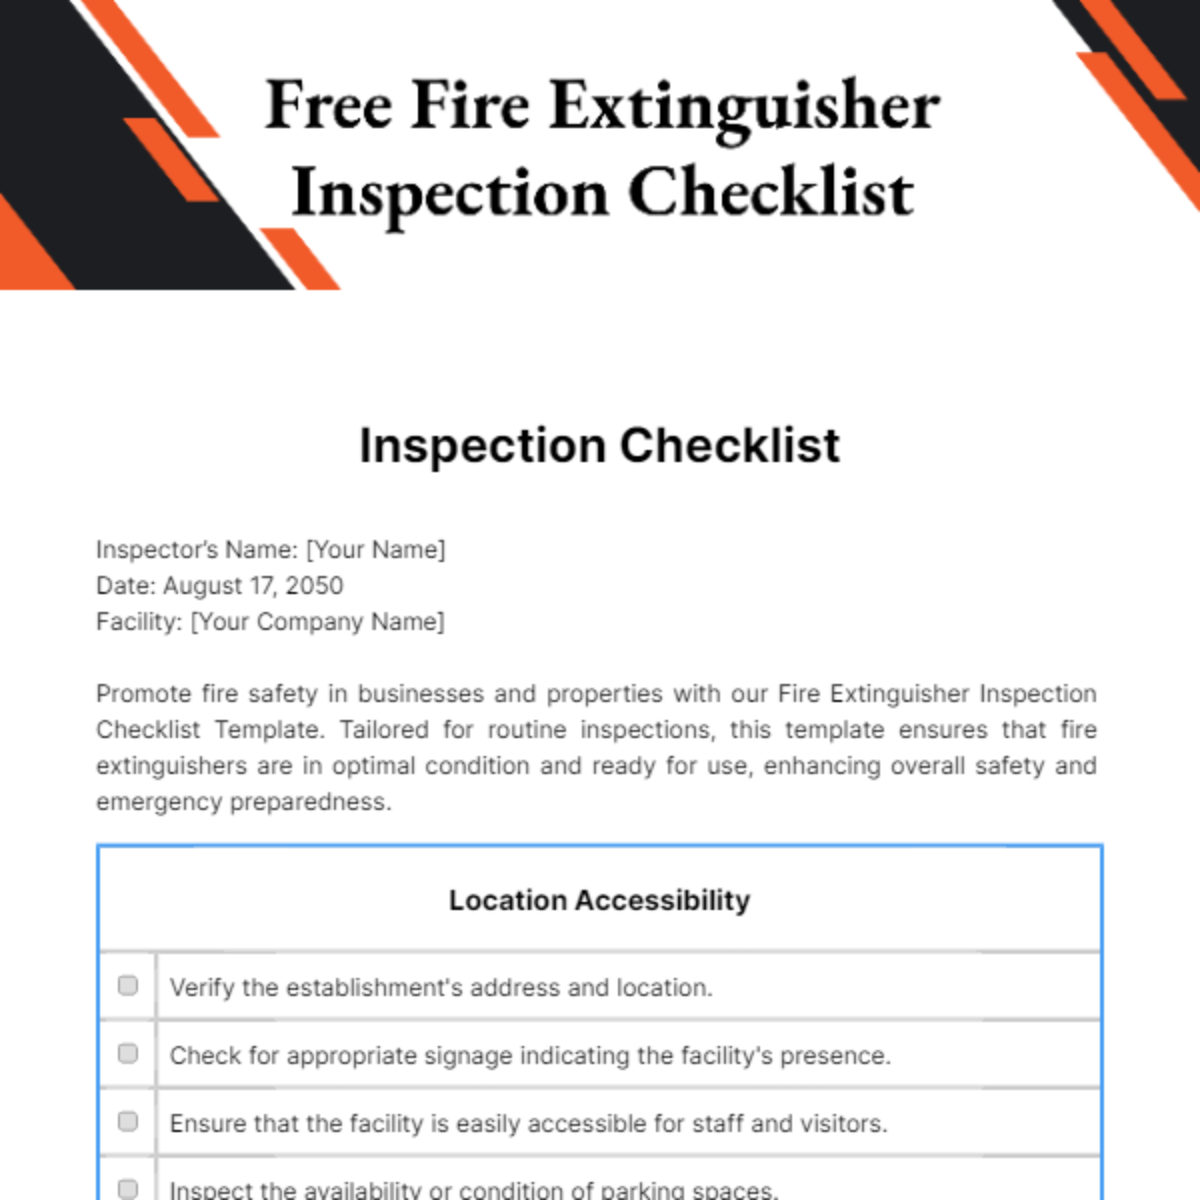 Free Fire Extinguisher Inspection Checklist Template